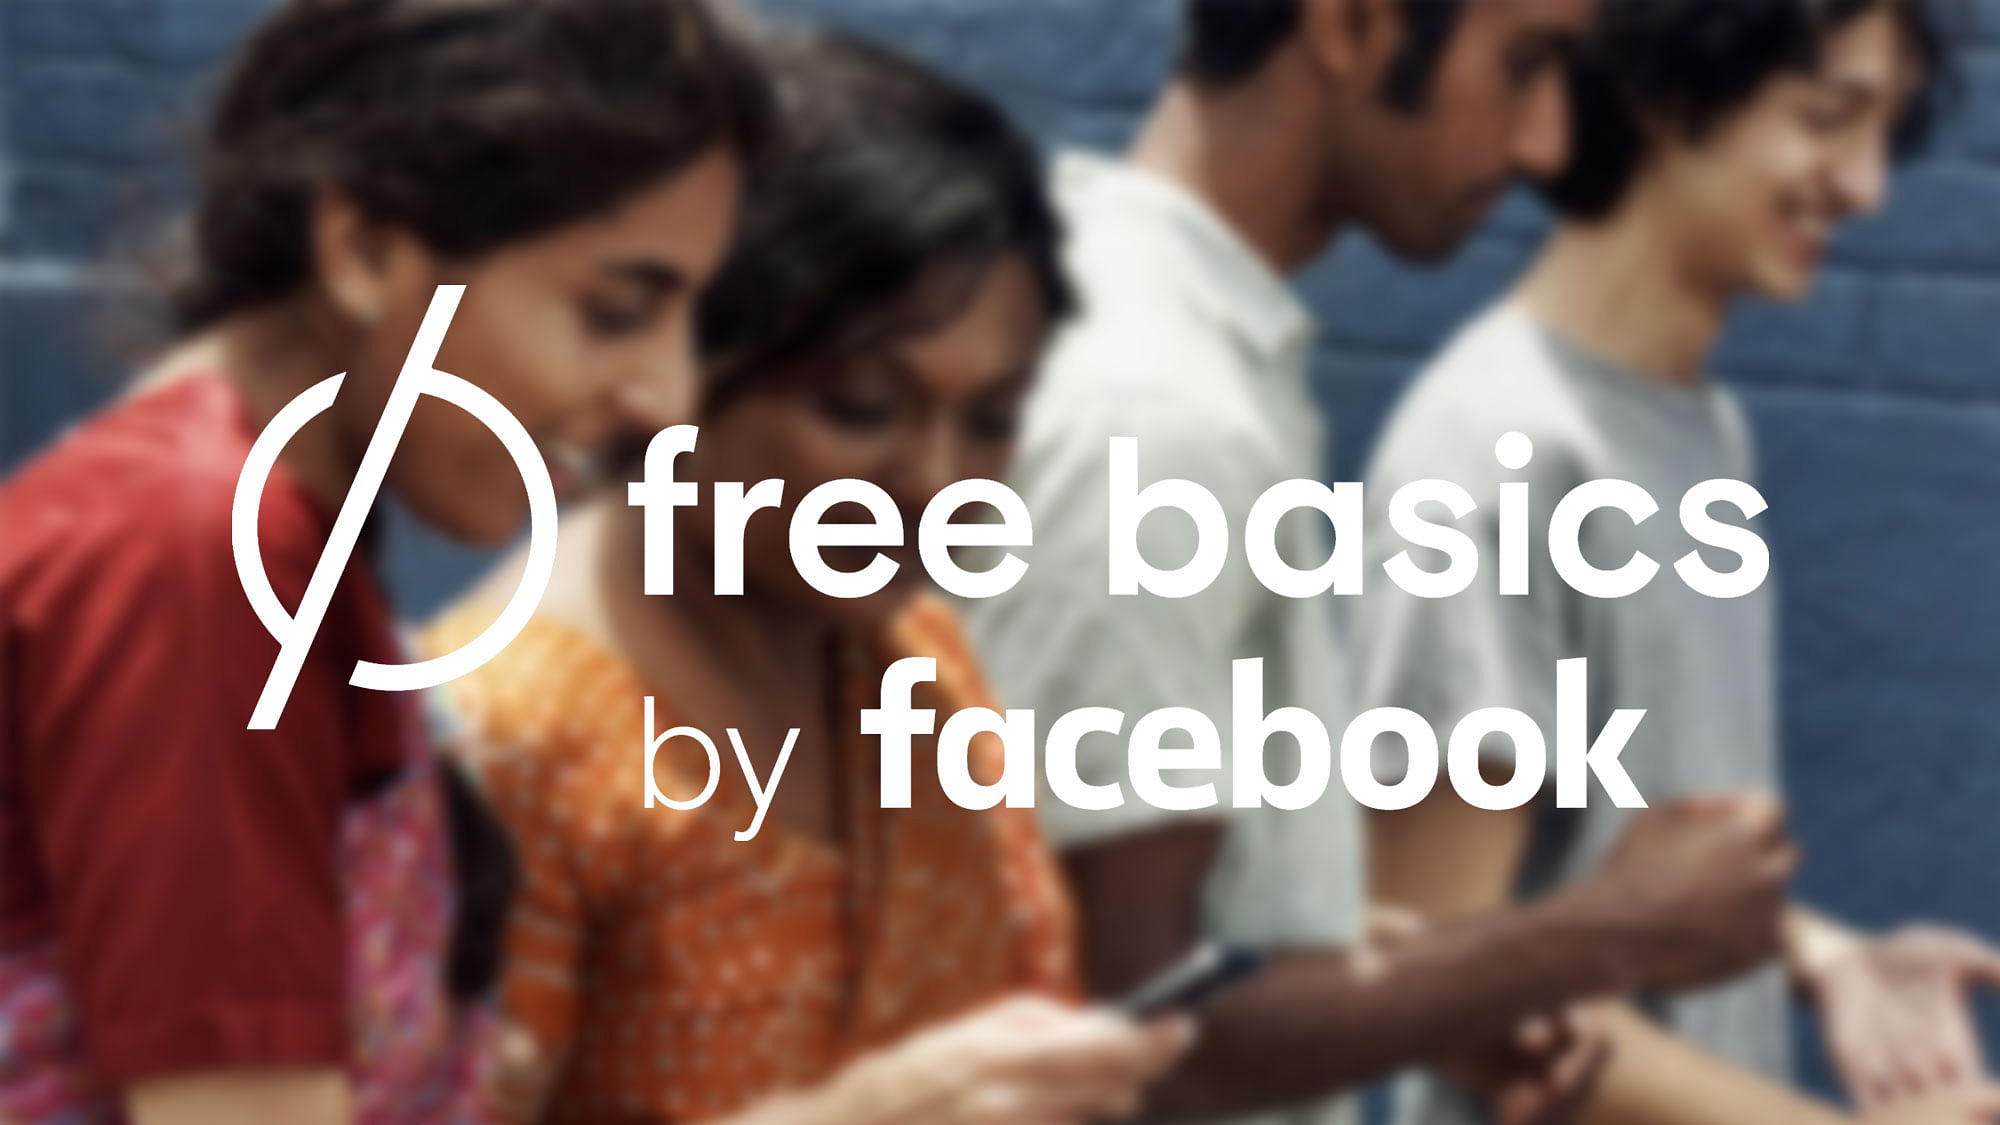 Facebook Free Basics might just even put off developers. (Photo: <a href="https://www.facebook.com/internetdotorg.india/?fref=ts&amp;rf=842868432437258">Facebook</a>)